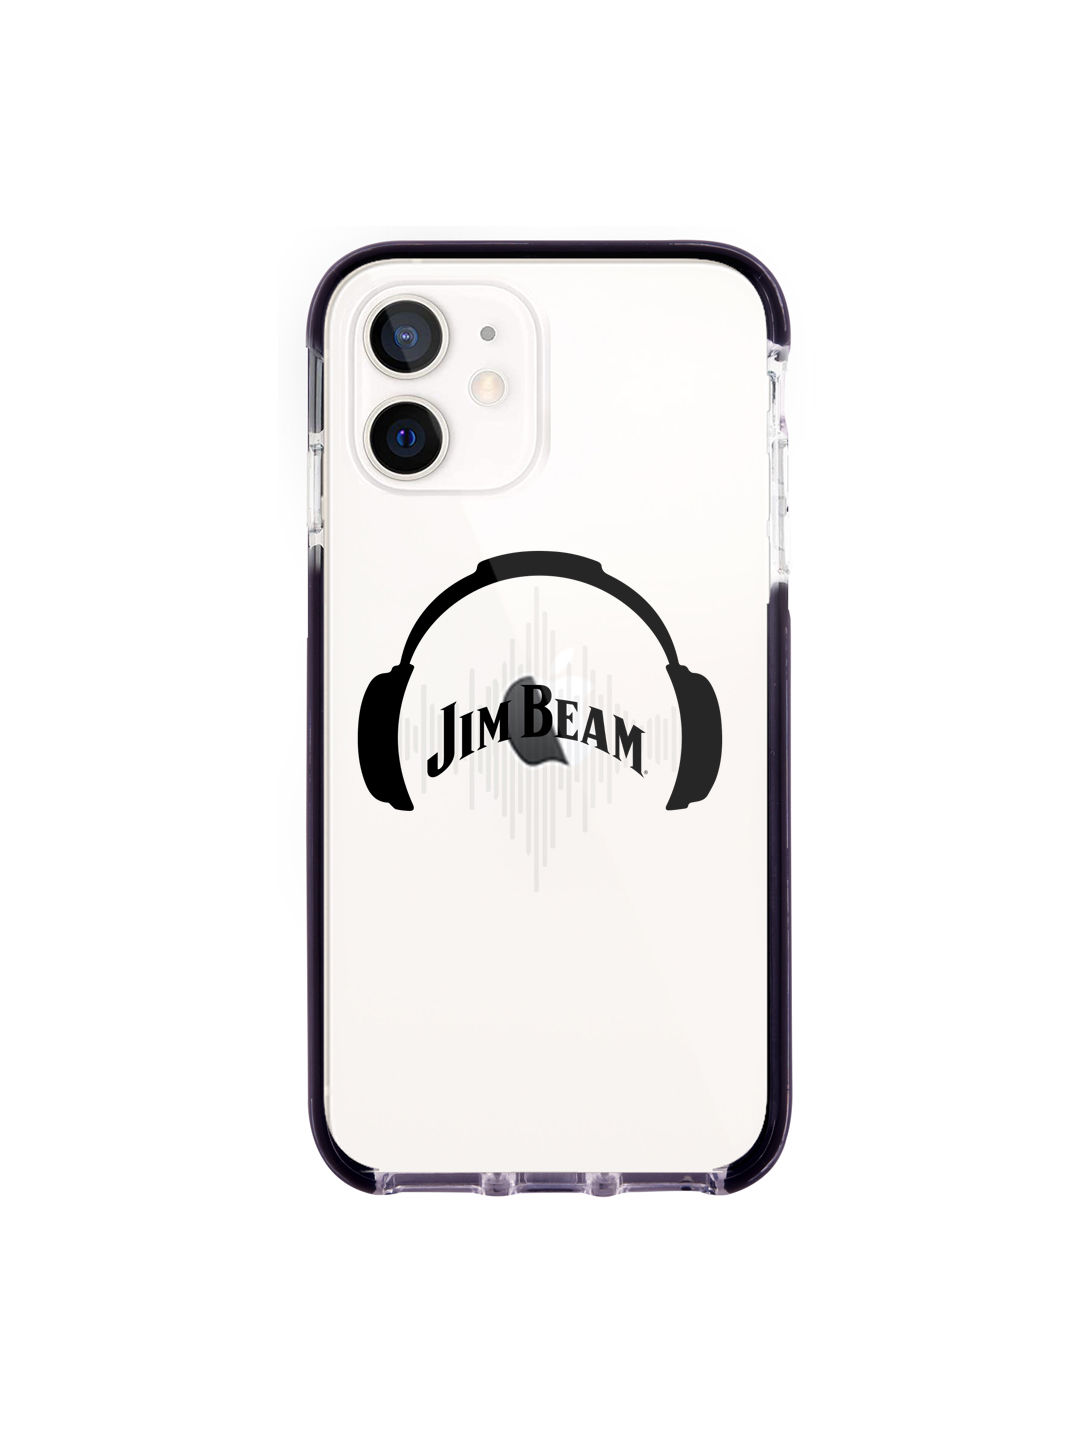 Jim Beam Solid Sound - Shield Case for iPhone 12 Mini